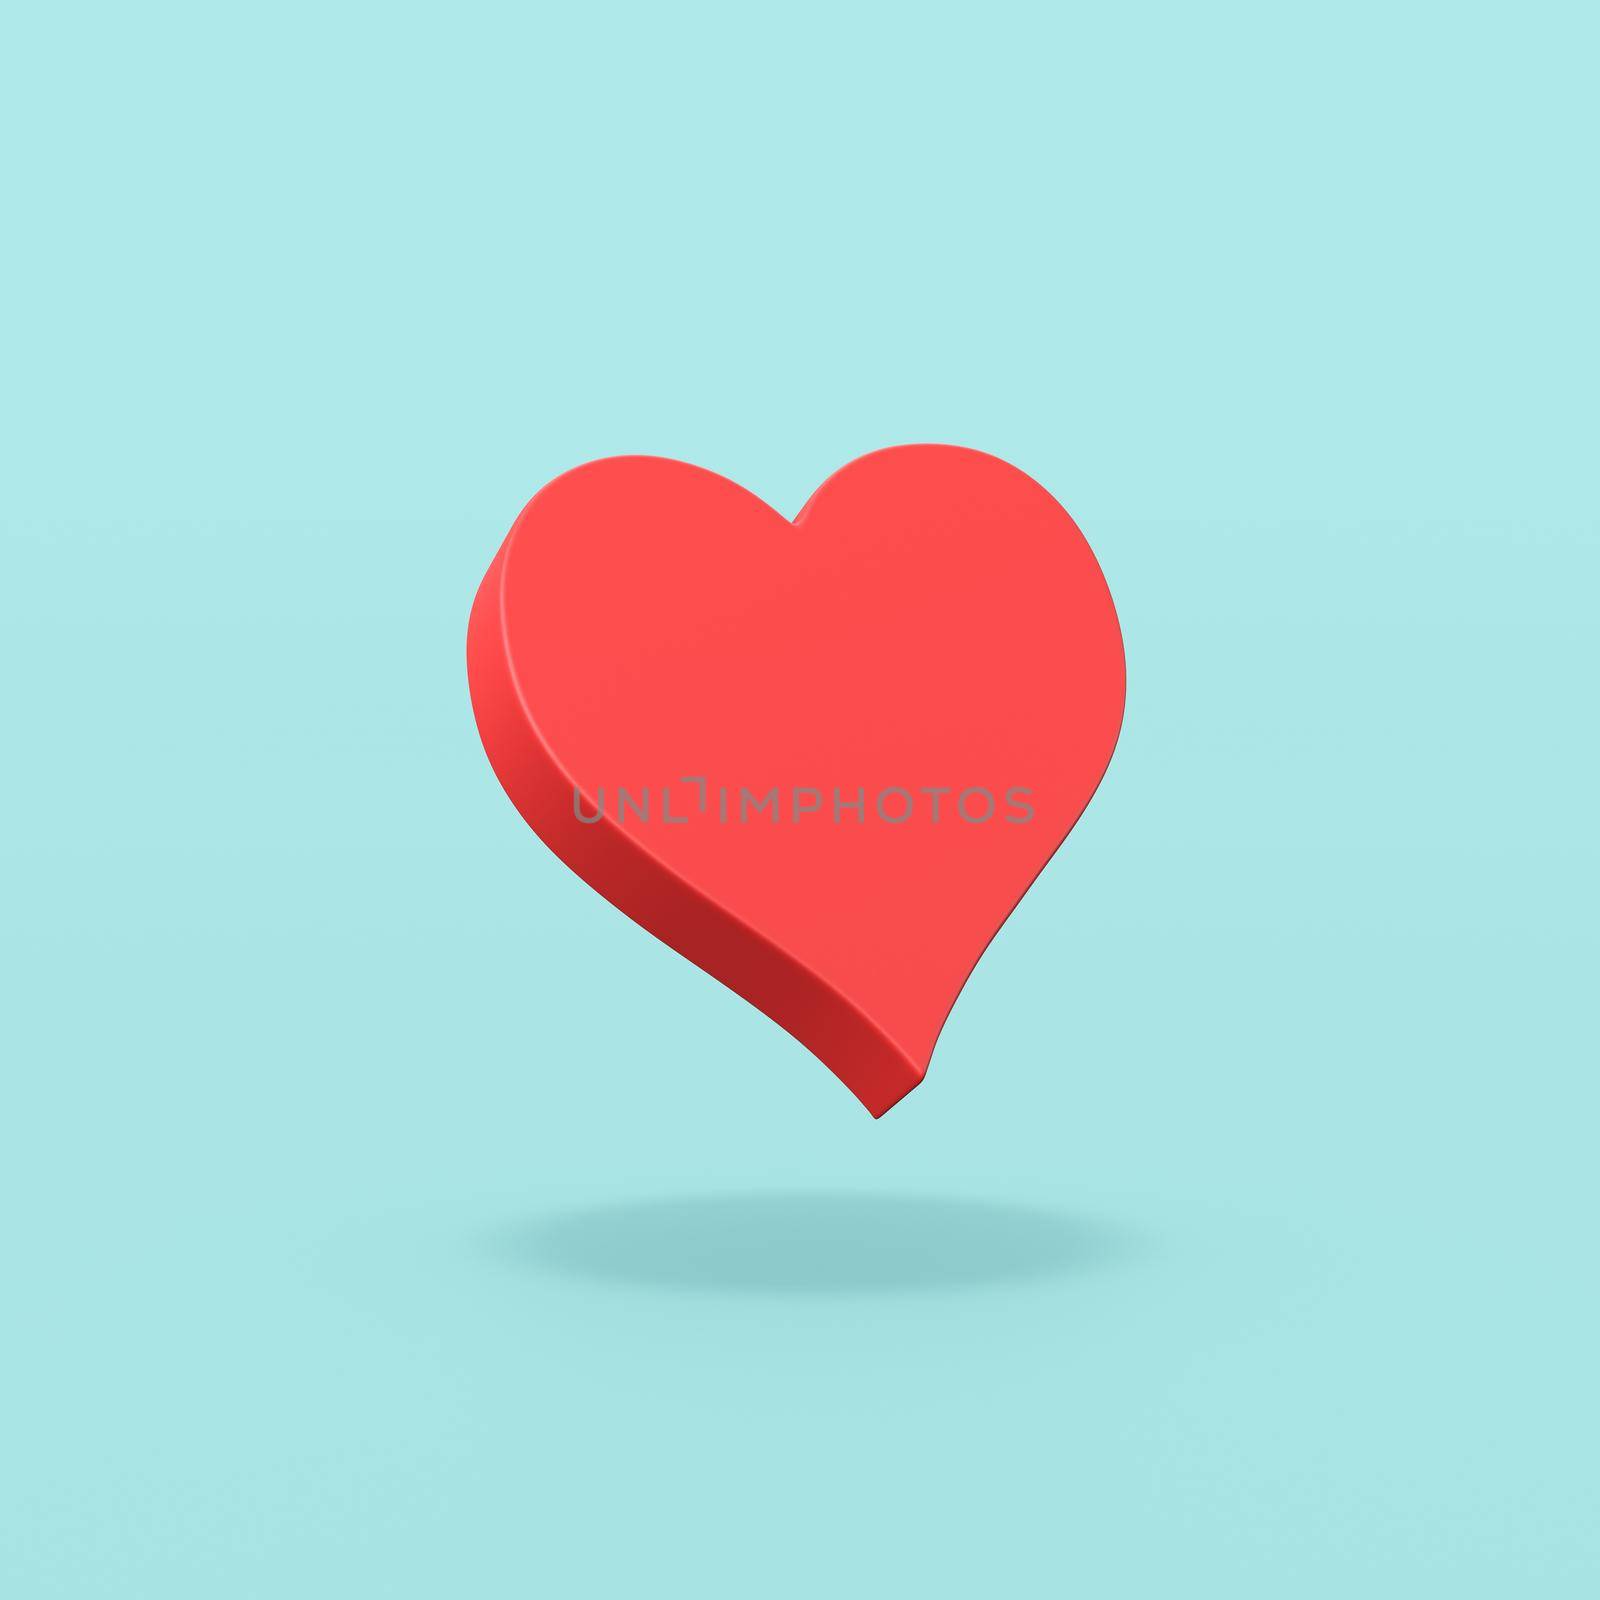 Red Heart Symbol Shape on Blue Background by make